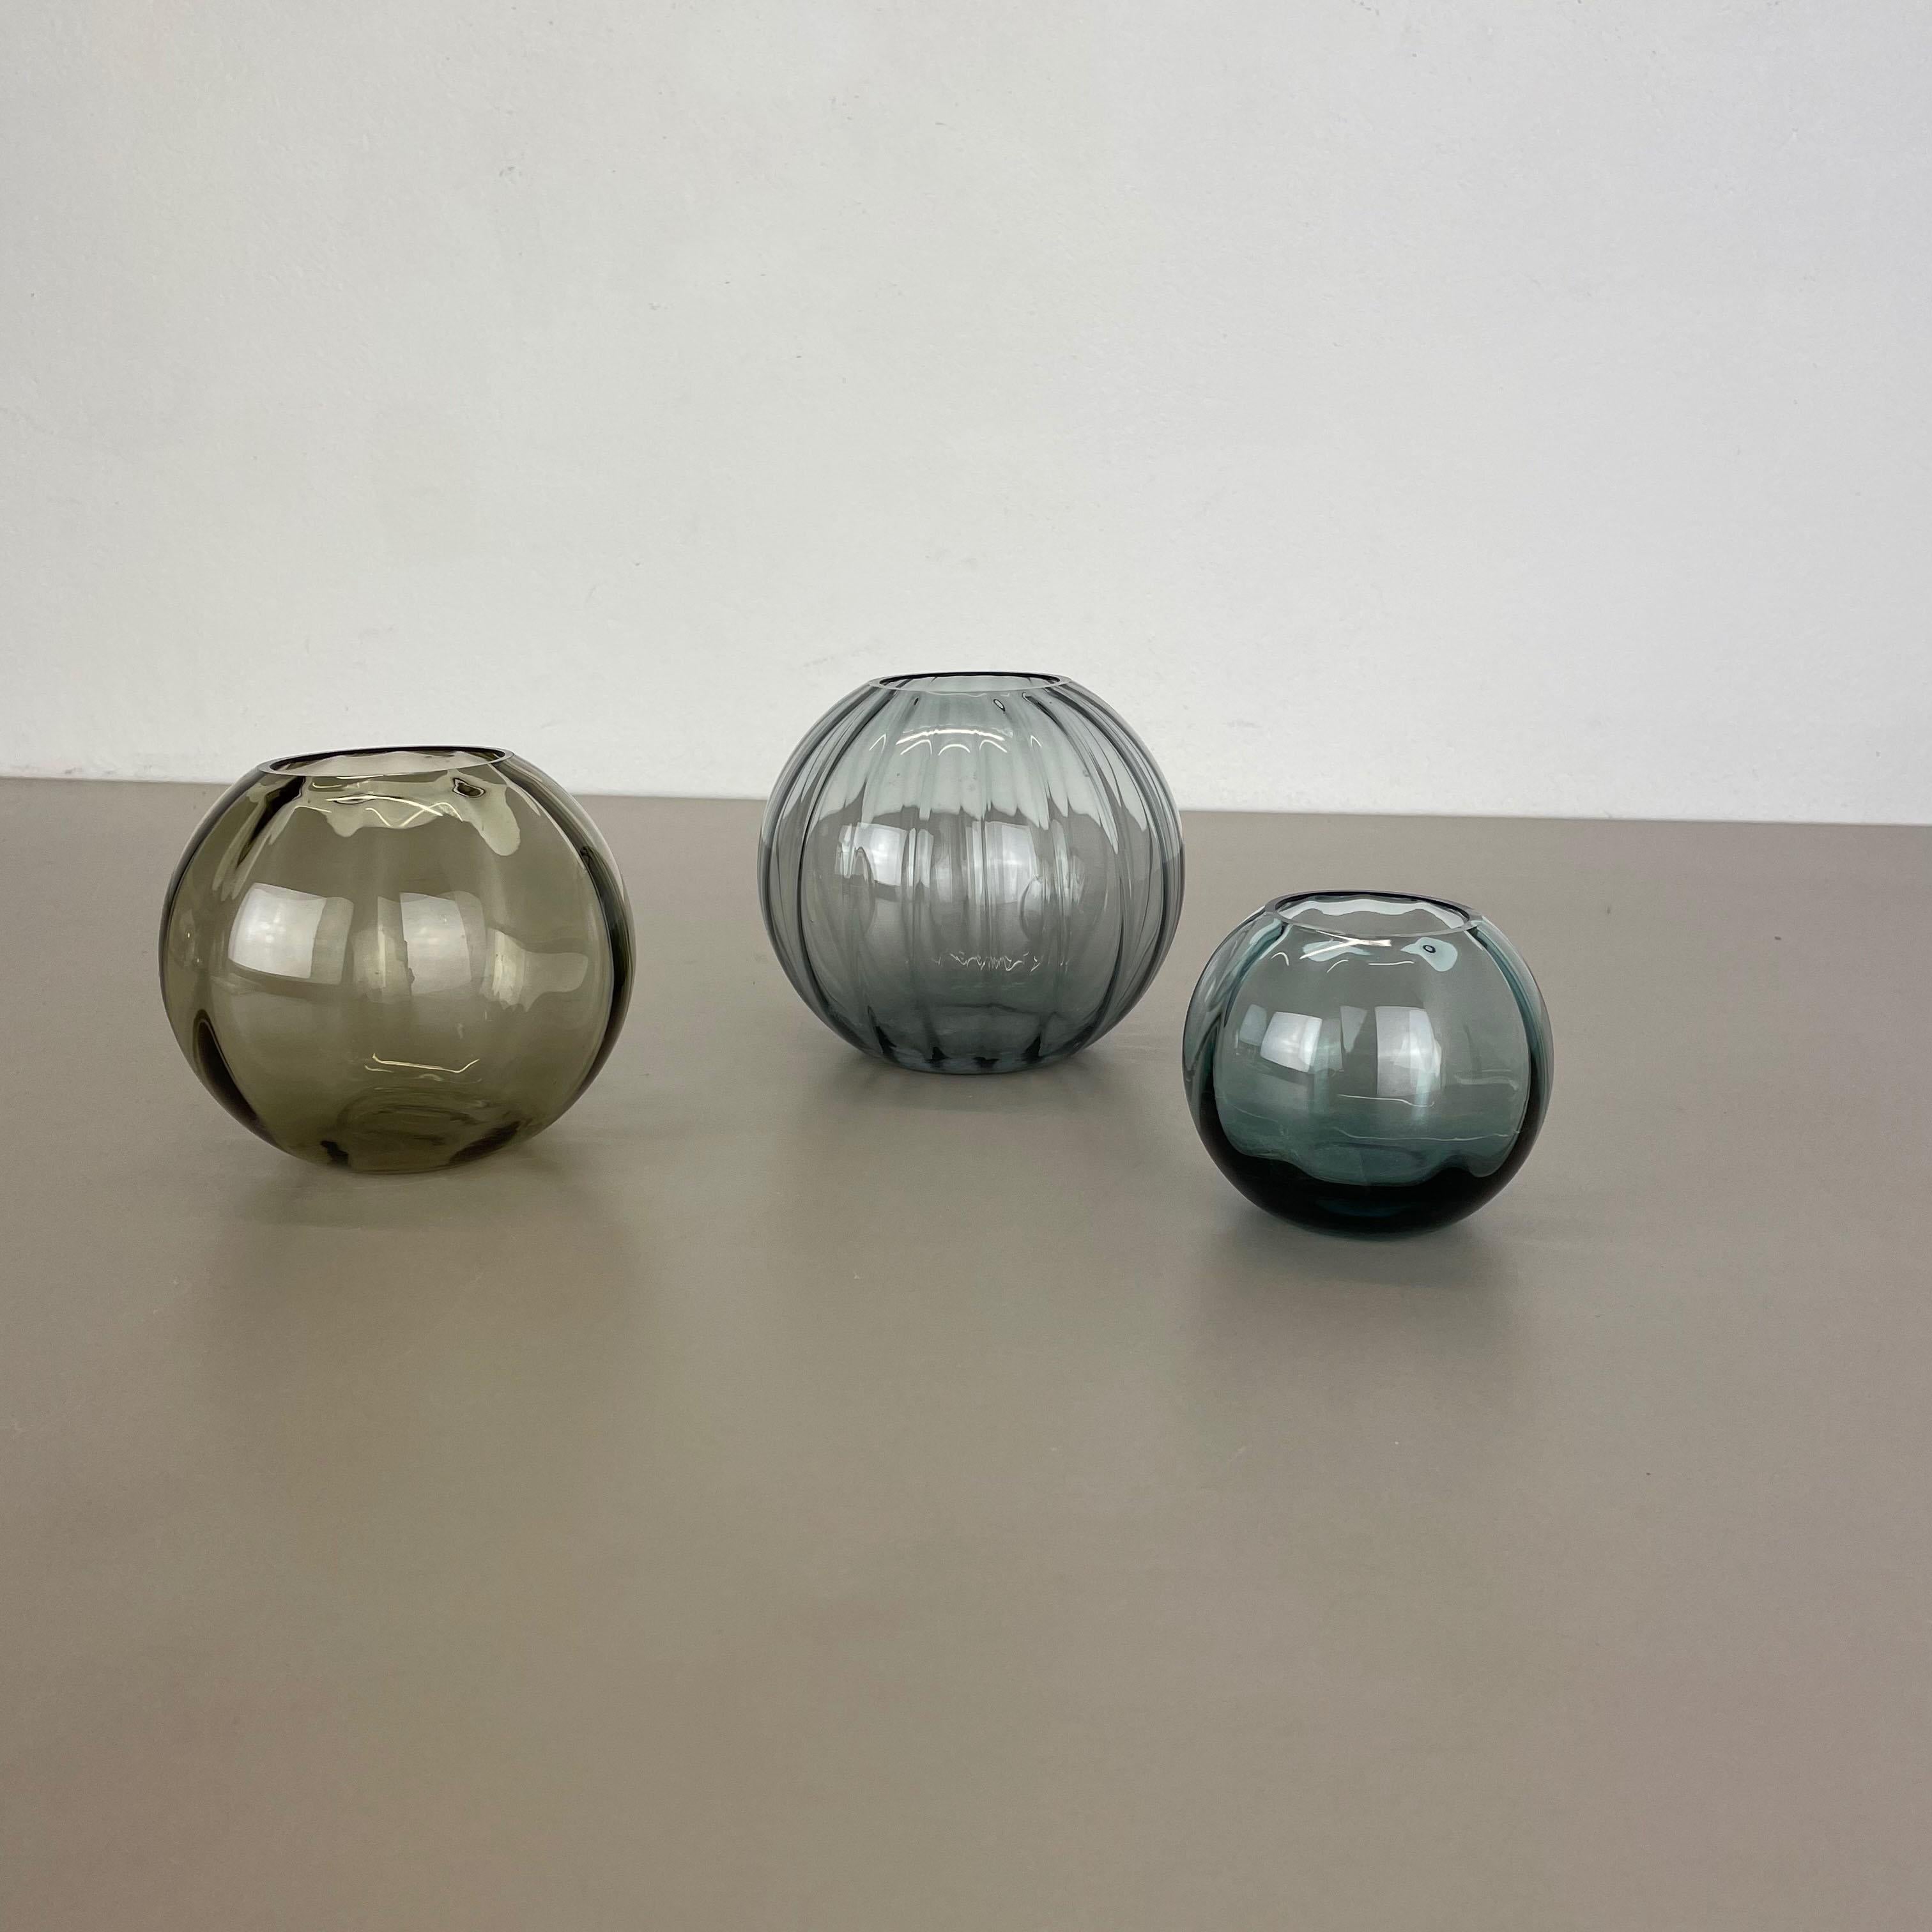 Vintage 1960s Set of 3 Ball Vases Turmaline by Wilhelm Wagenfeld for WMF Germany In Good Condition For Sale In Kirchlengern, DE